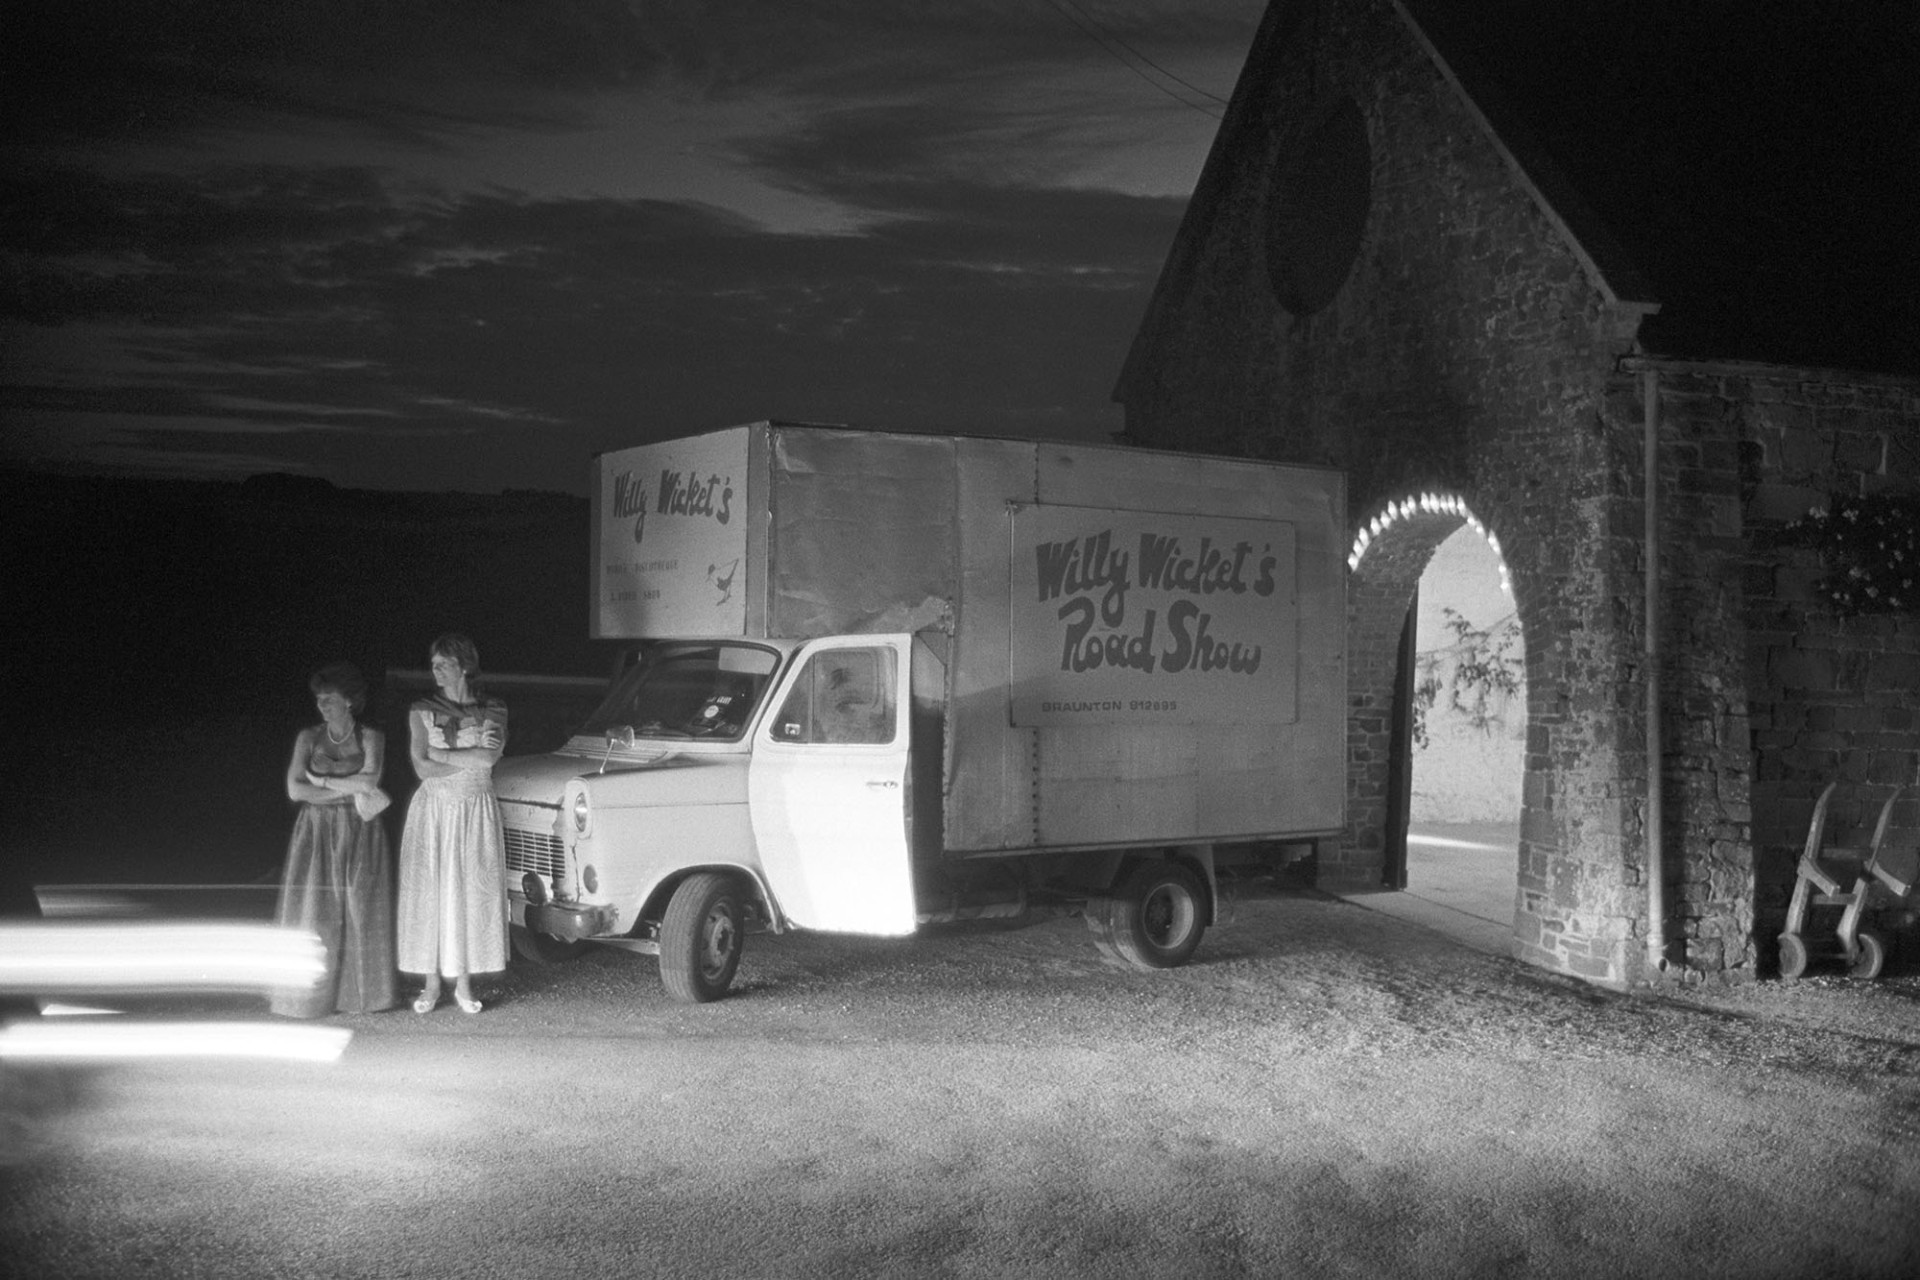 Hunt ball disco lorry with two women arriving in long dresses at night, lit by headlights. 
[Two women in evening dresses stood by a small lorry with the Willy Wicket's Road Show or disco for the hunt ball at Colleton Manor, Chulmleigh, at night. The scene is lit by the headlights of an approaching car.]